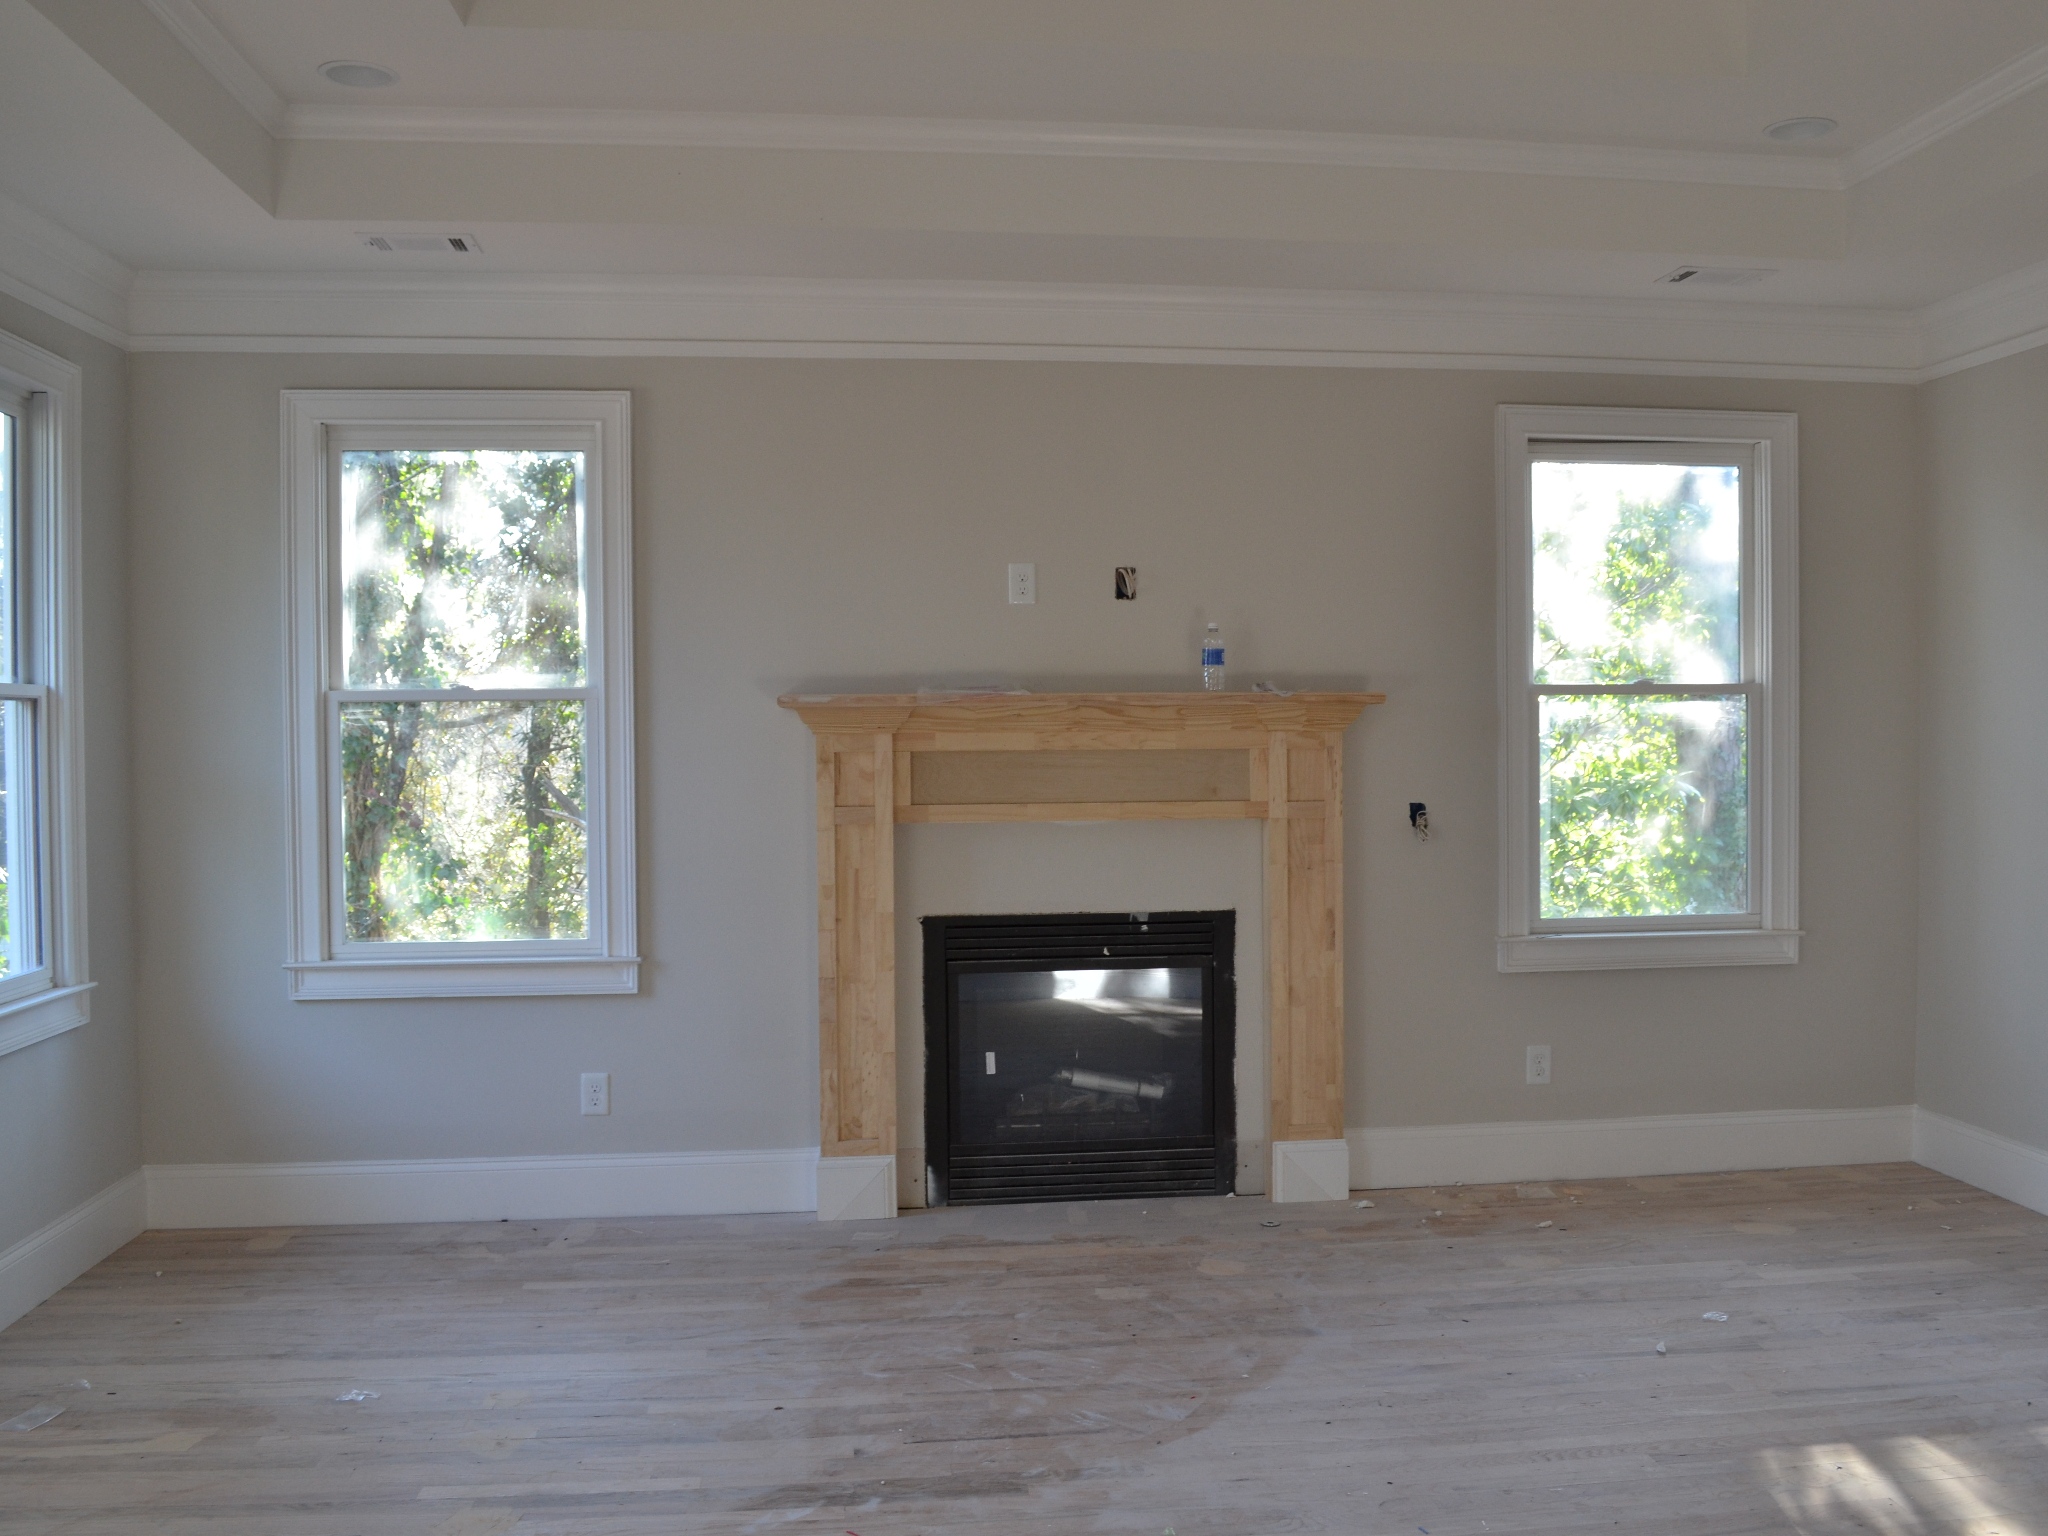 Master Bedroom With Gas Log Fireplace Trey Ceiling Vision